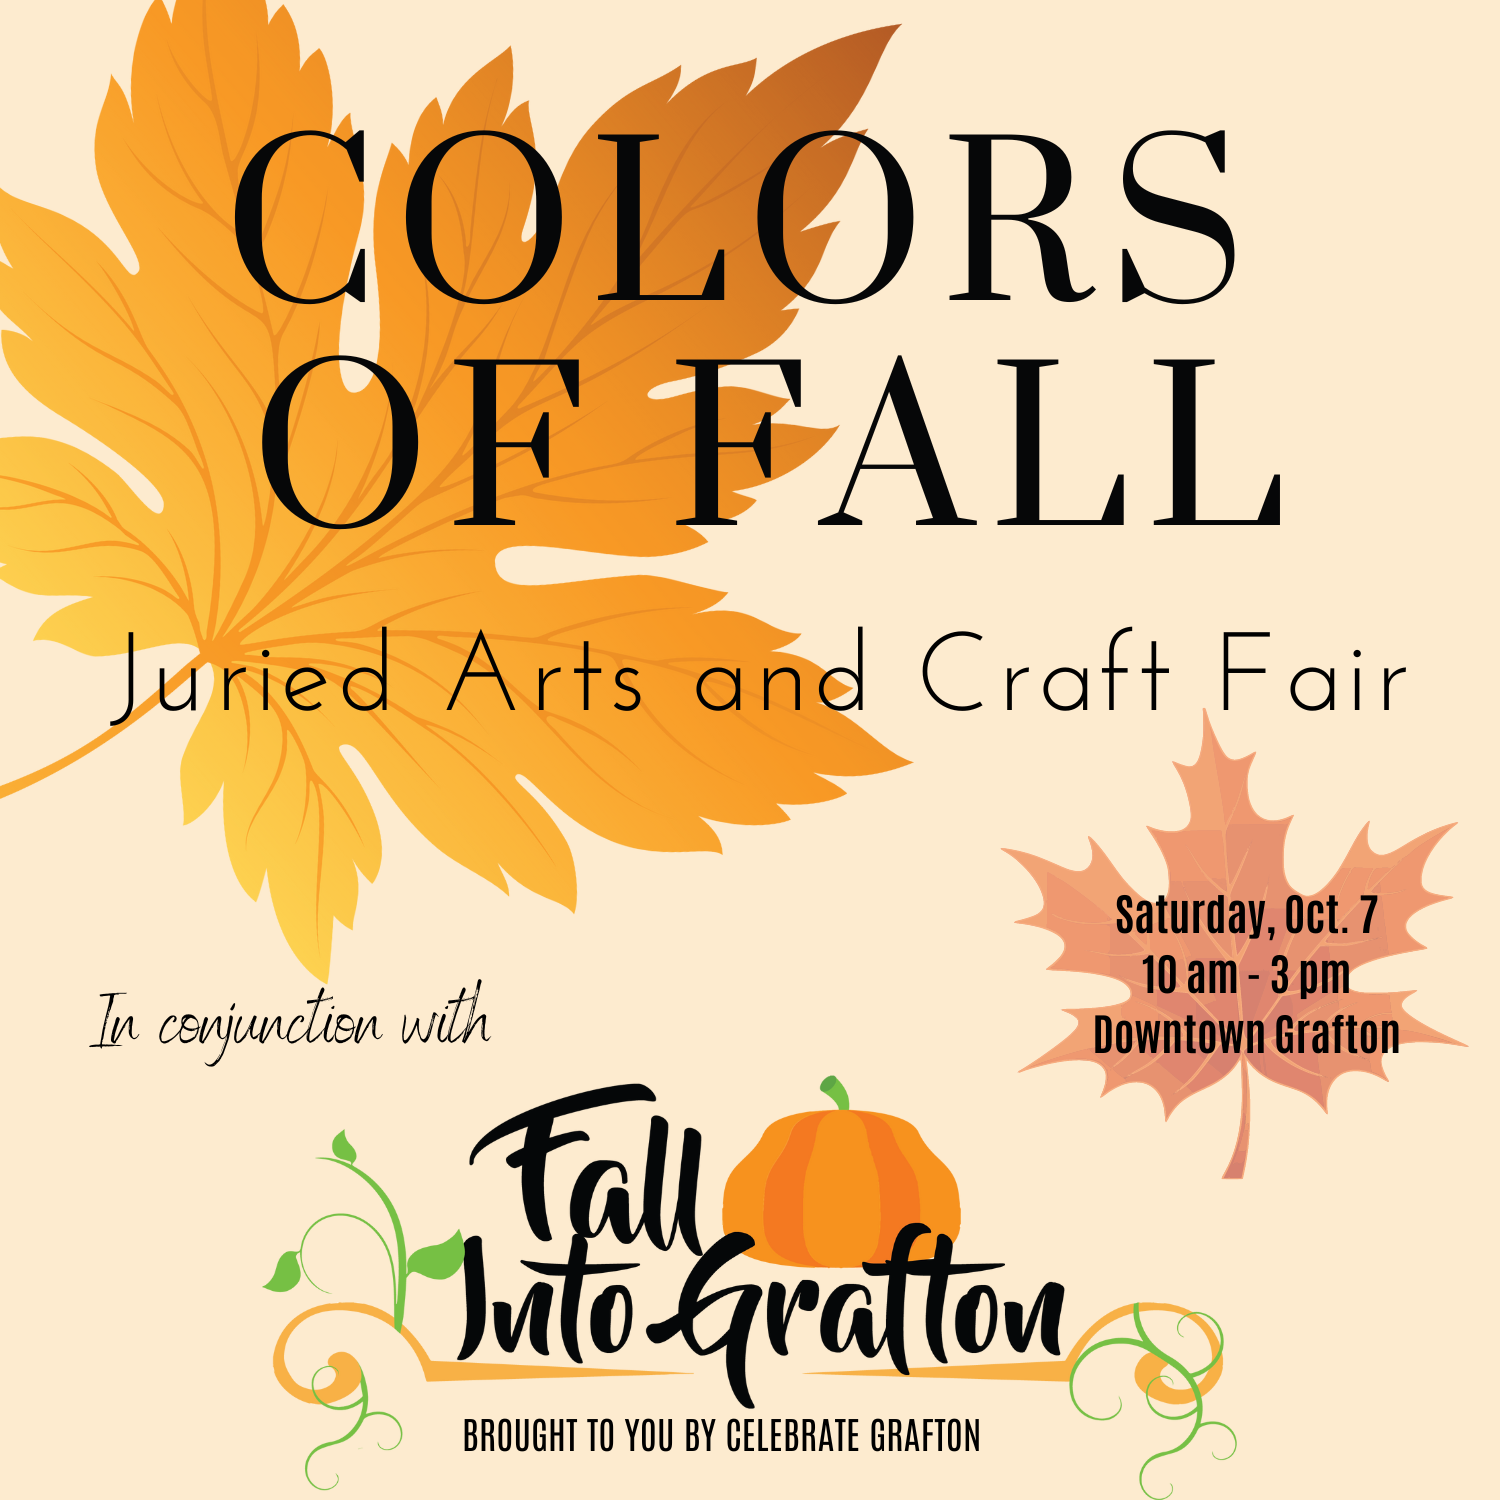 Website – Color of Fall Juried Arts & Craft Show